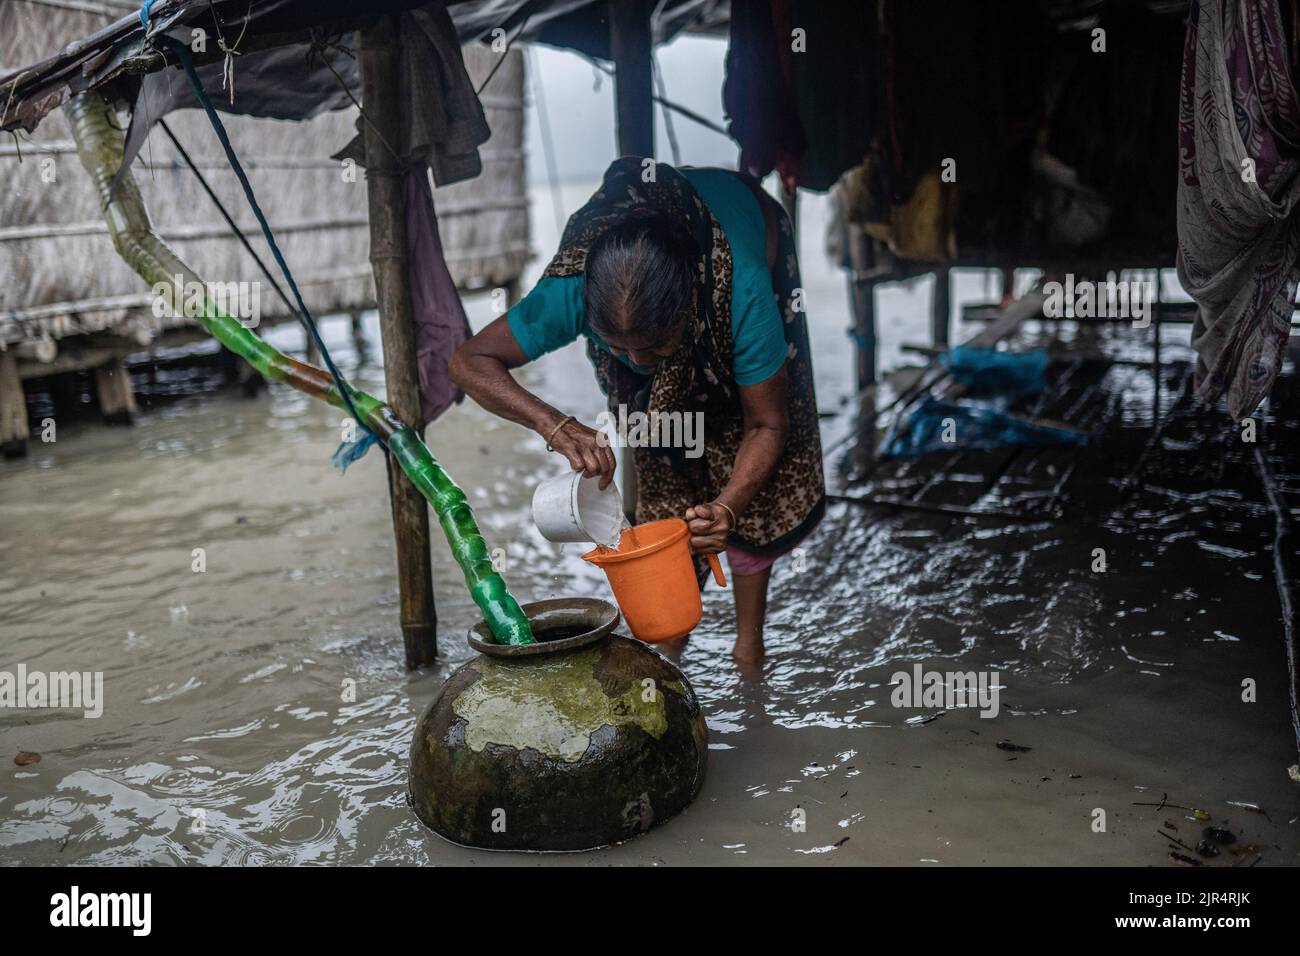 A woman tries to fill up her mag from the rainwater which comes from the pet bottle-made pipe at Kalabogi village in Khulna. Not too long ago Kalabogi, a coastal village in Bangladesh, was full of cultivable land until the rising sea levels began to swallow the area all the way up to the Bay of Bengal. Frequent cyclones and floods hit the village since the late 1990s. In 2009, a major cyclone named Aila destroyed the country's 1,400 kilometres of embankments, 8,800 kilometres of roads, and about 3,50,000 acres of farmland. Several hundred people were reportedly killed in the disaster. The farm Stock Photo